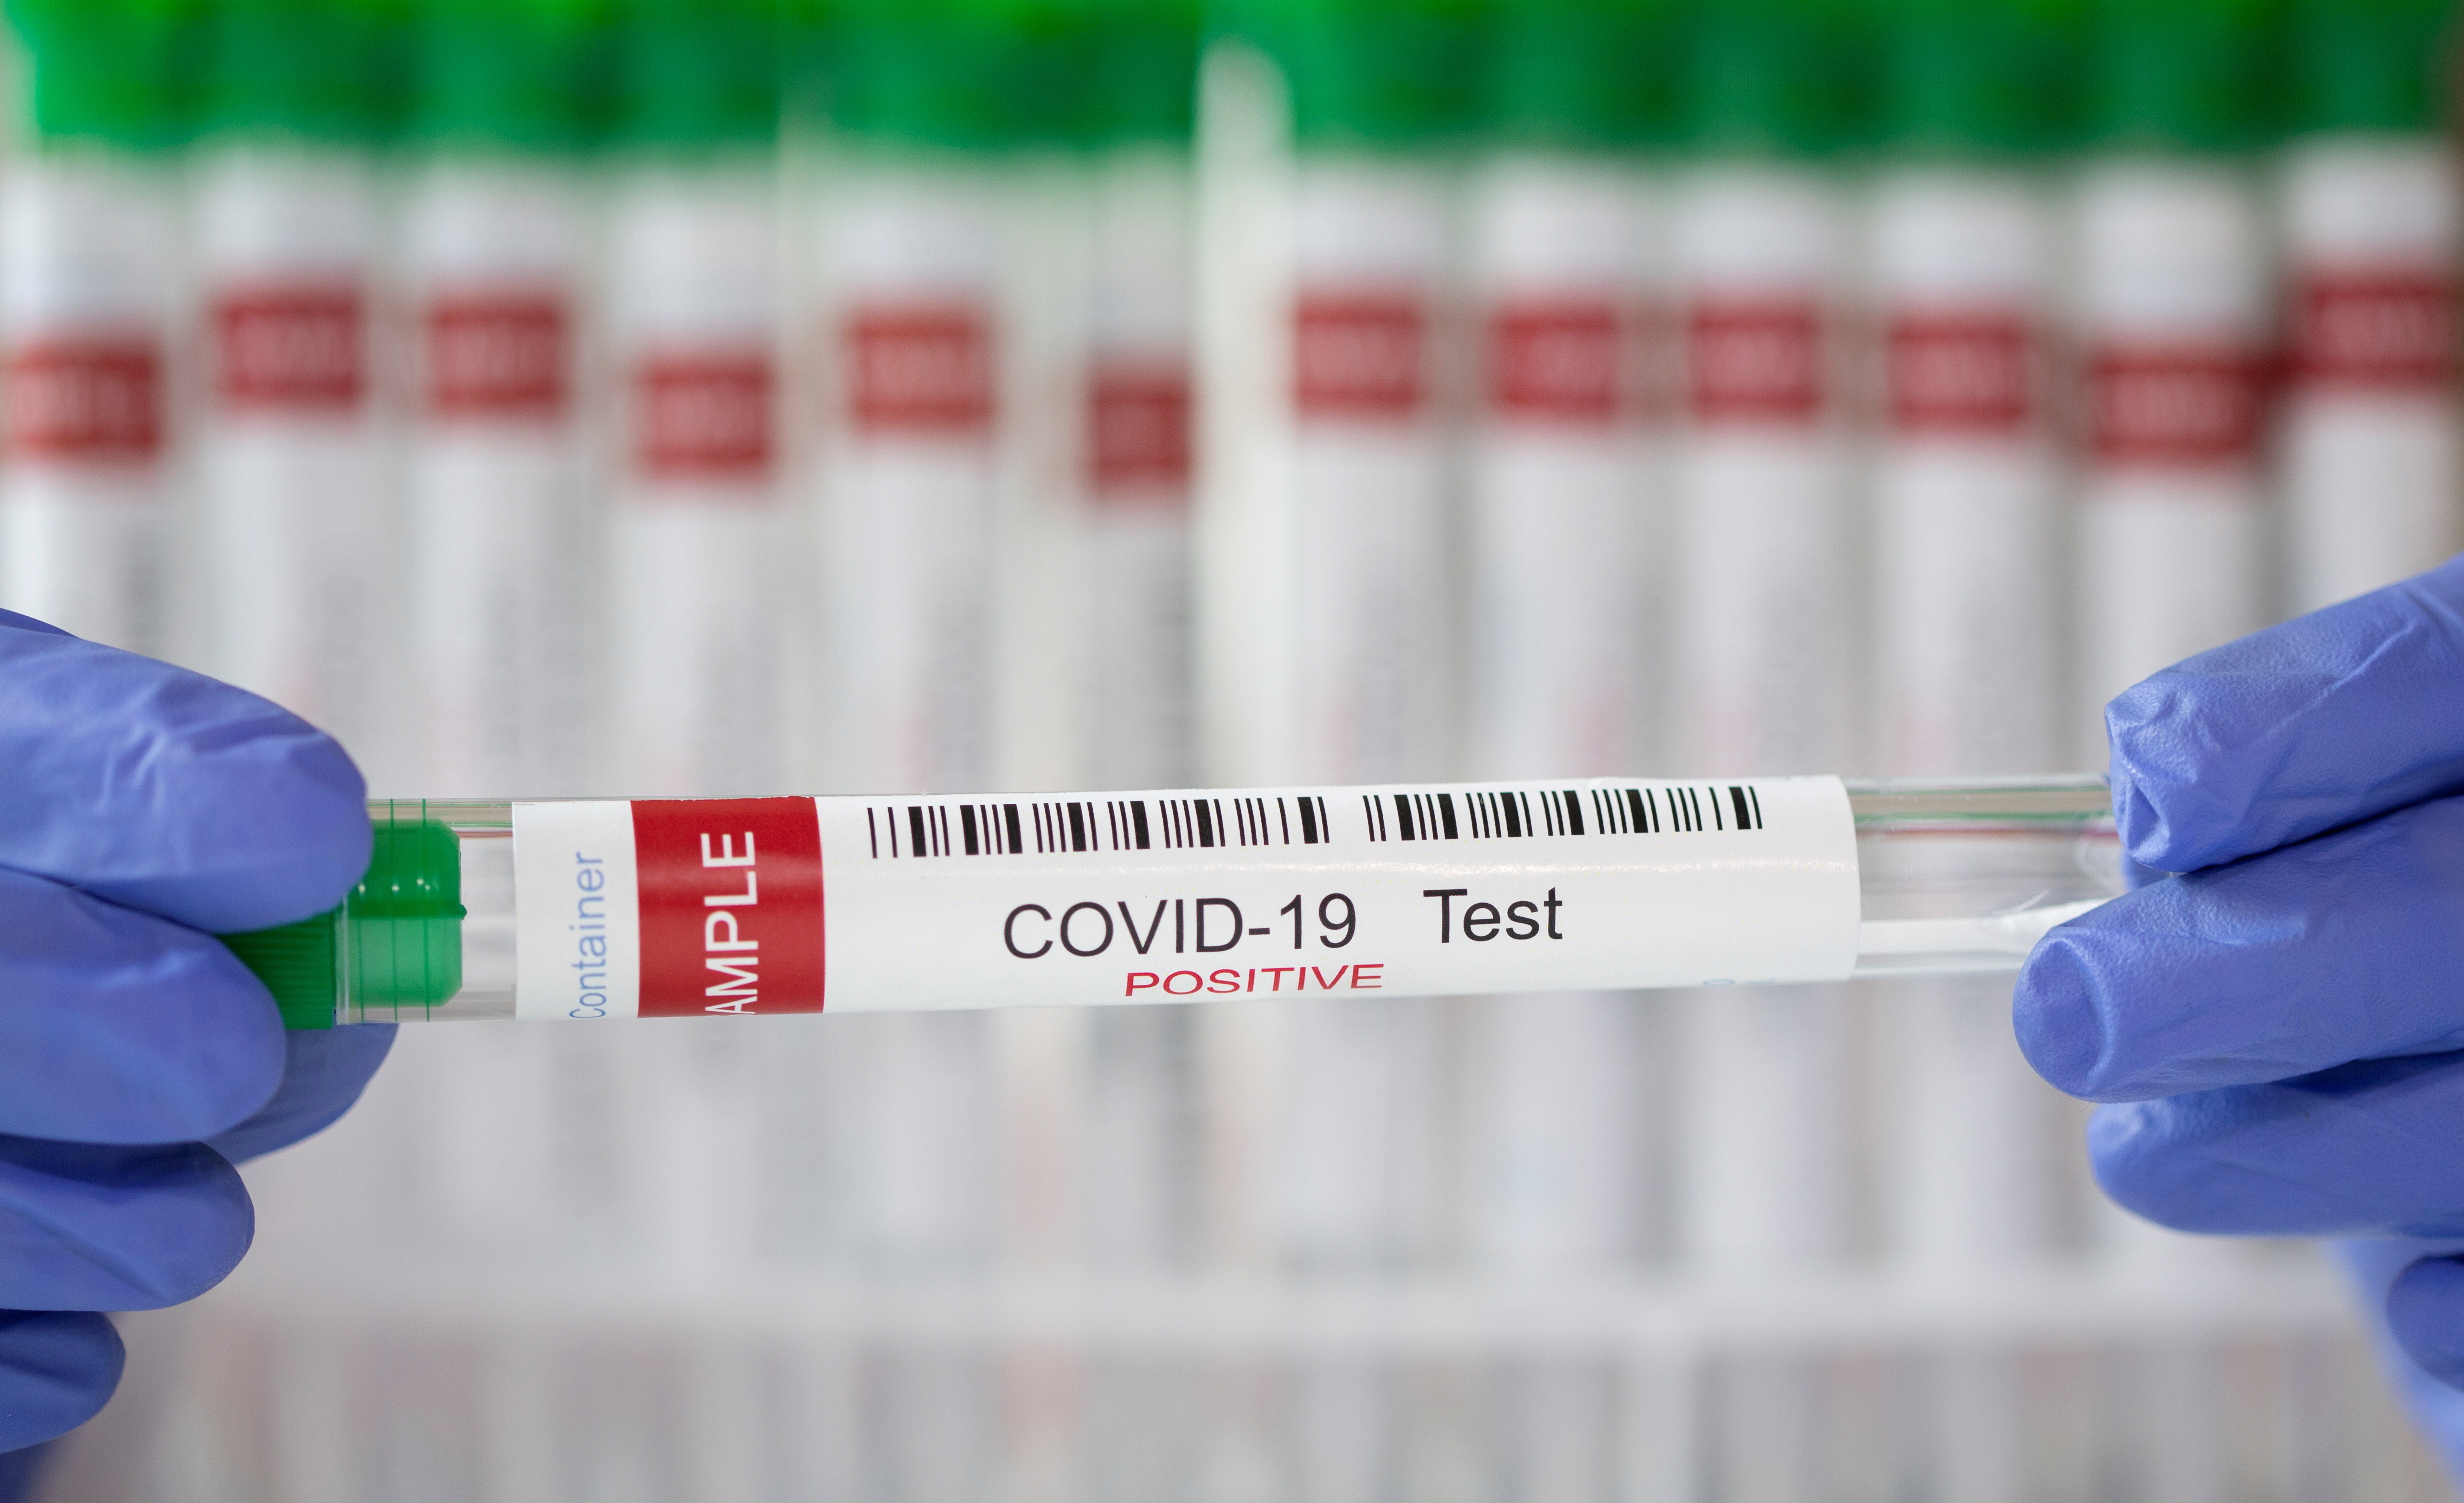 FILE PHOTO: A test tube labelled "COVID-19 Test positive" is seen in this illustration picture